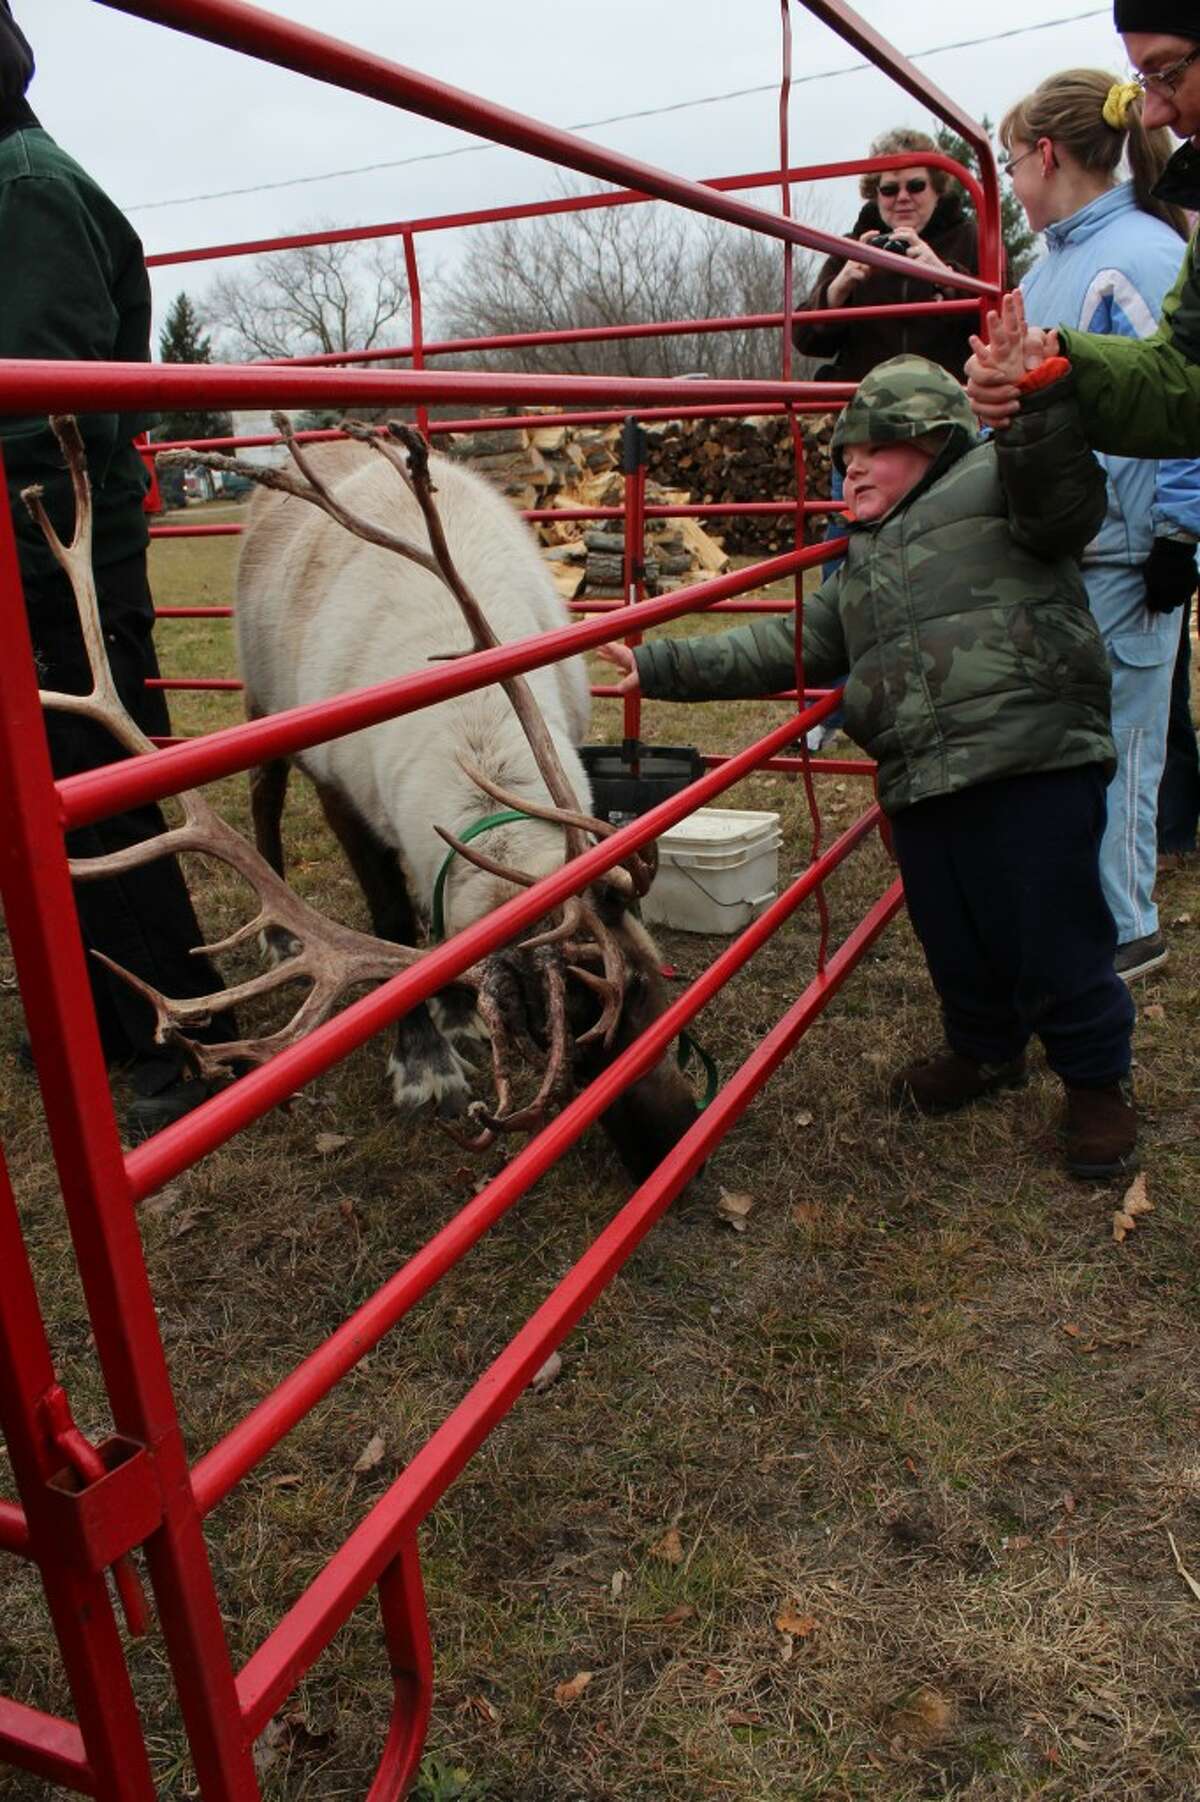 PETTING REINDEER: Ryan Wildey, 4, stretches to reach a reindeer caged outside the Reed City Depot on Saturday at the Evergreen Festival. Ryan’s family comes to the holiday celebration every year.